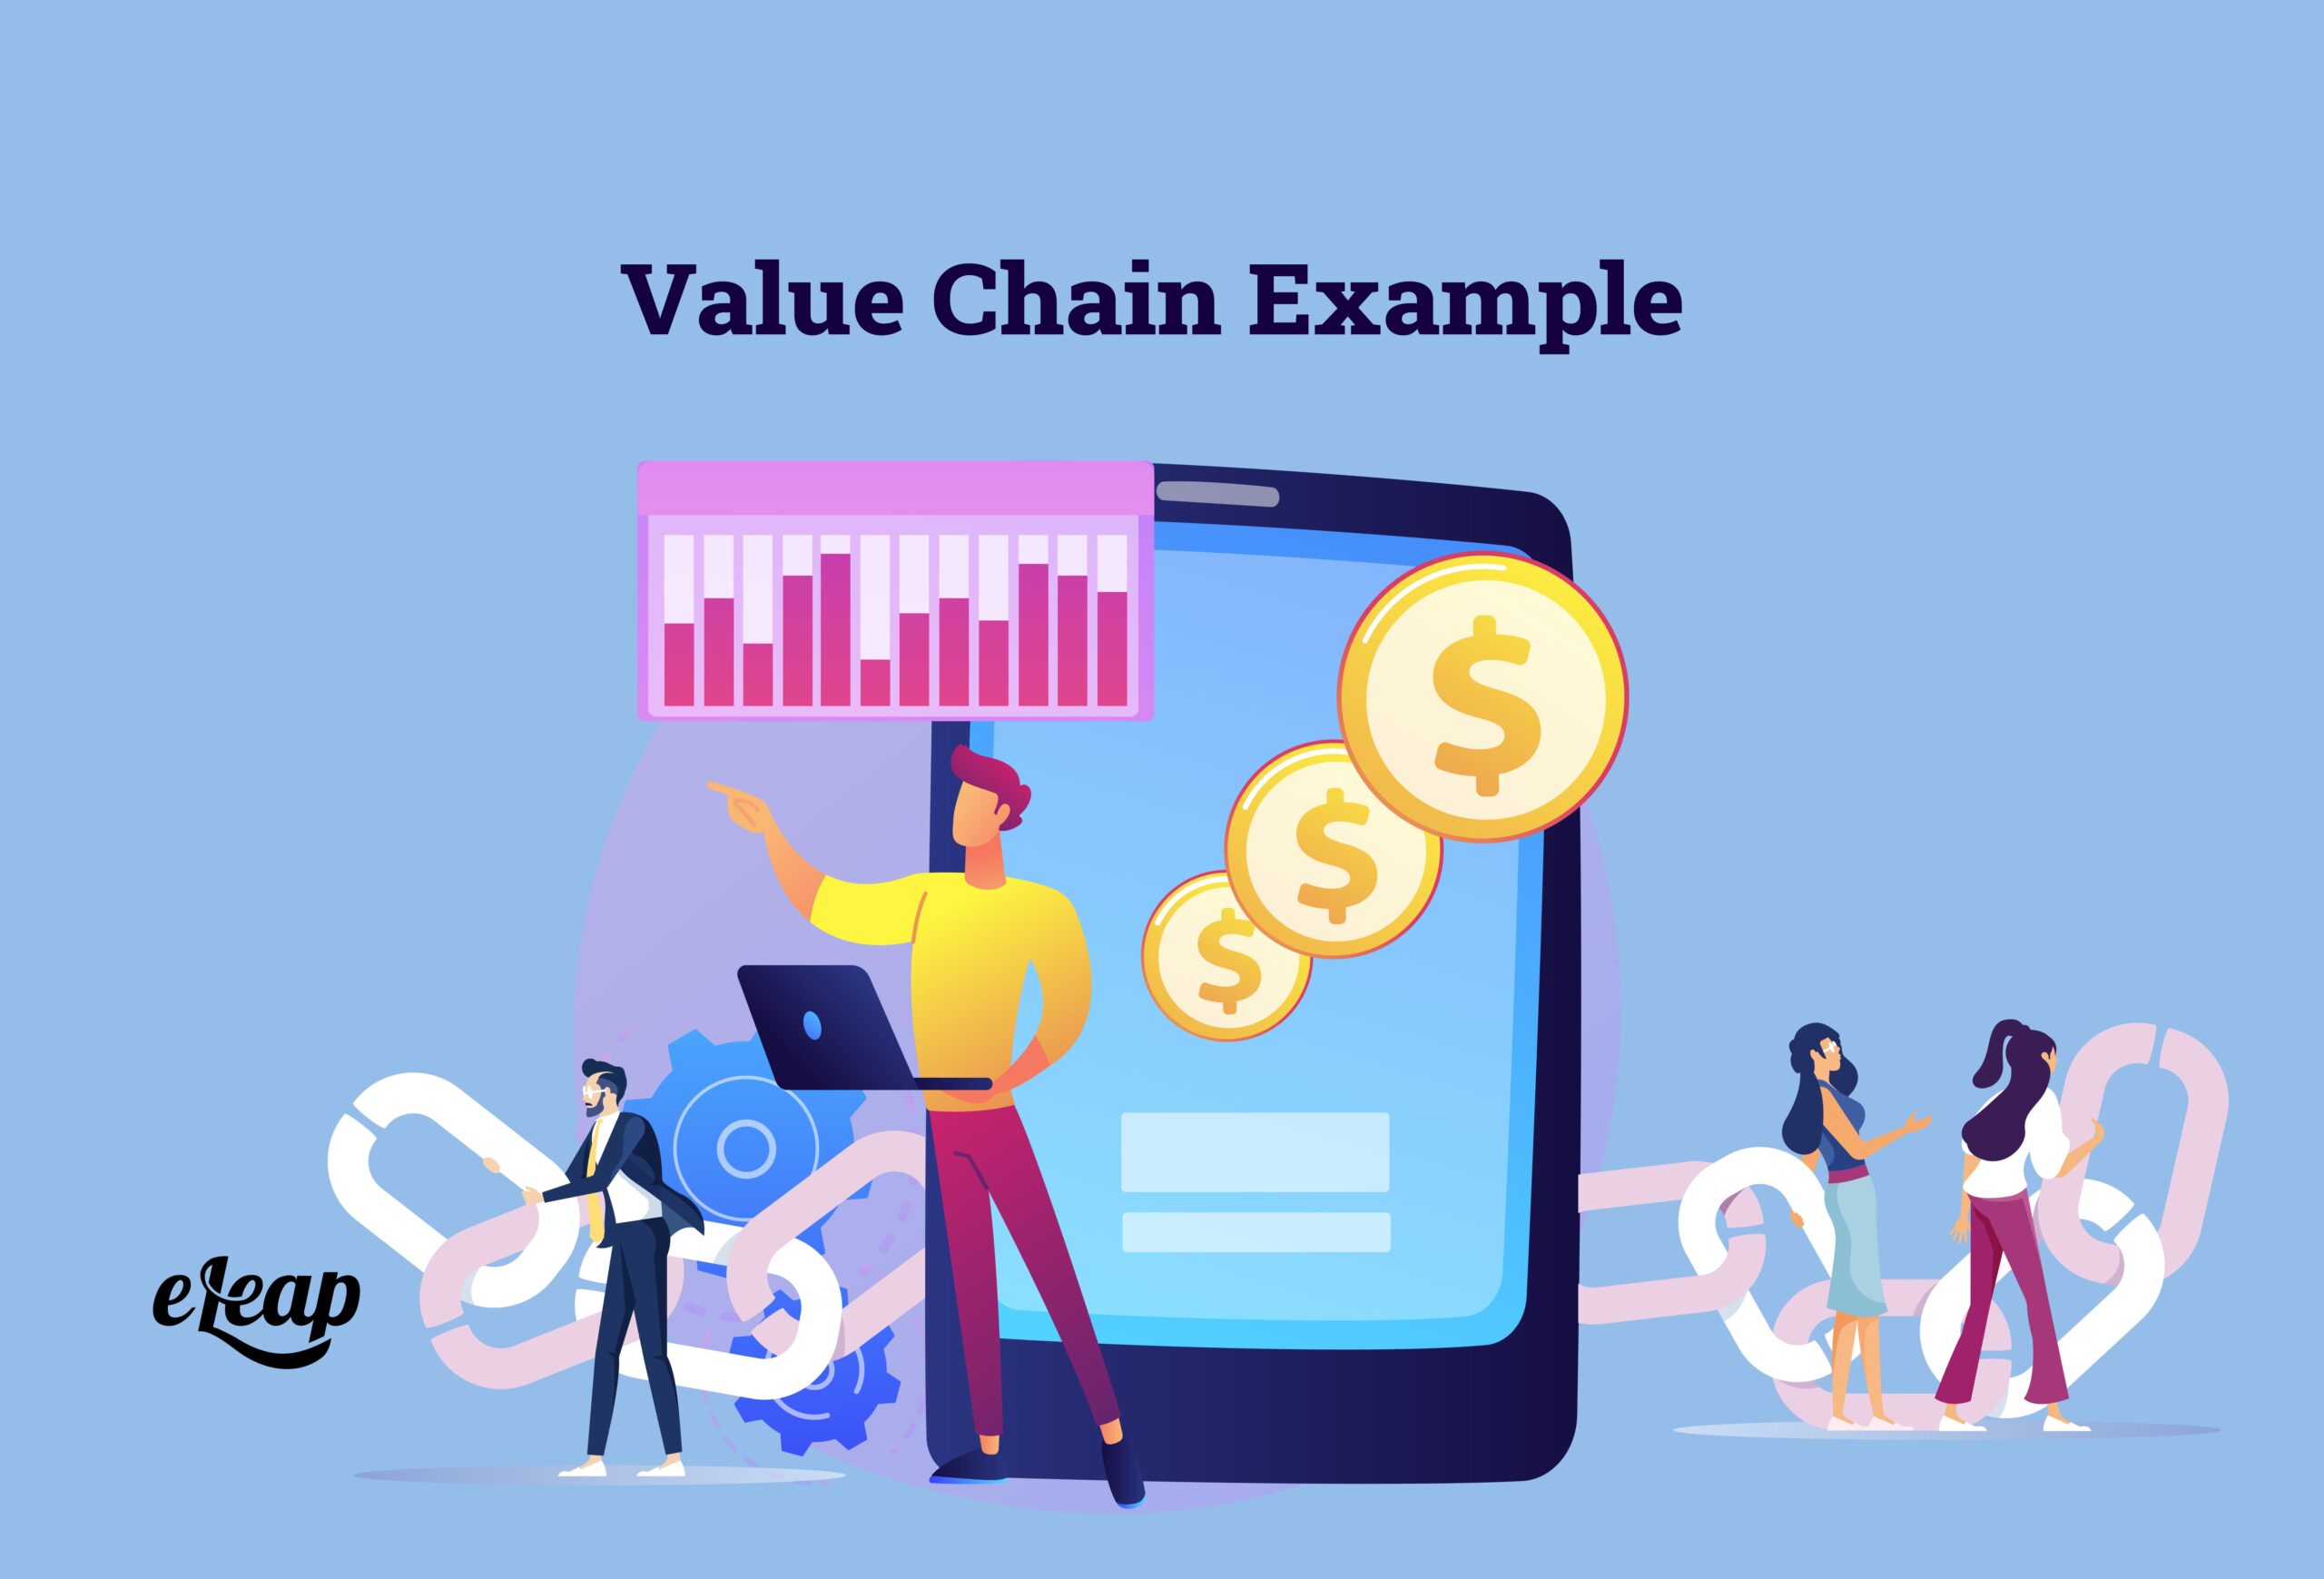 Value Chain Example